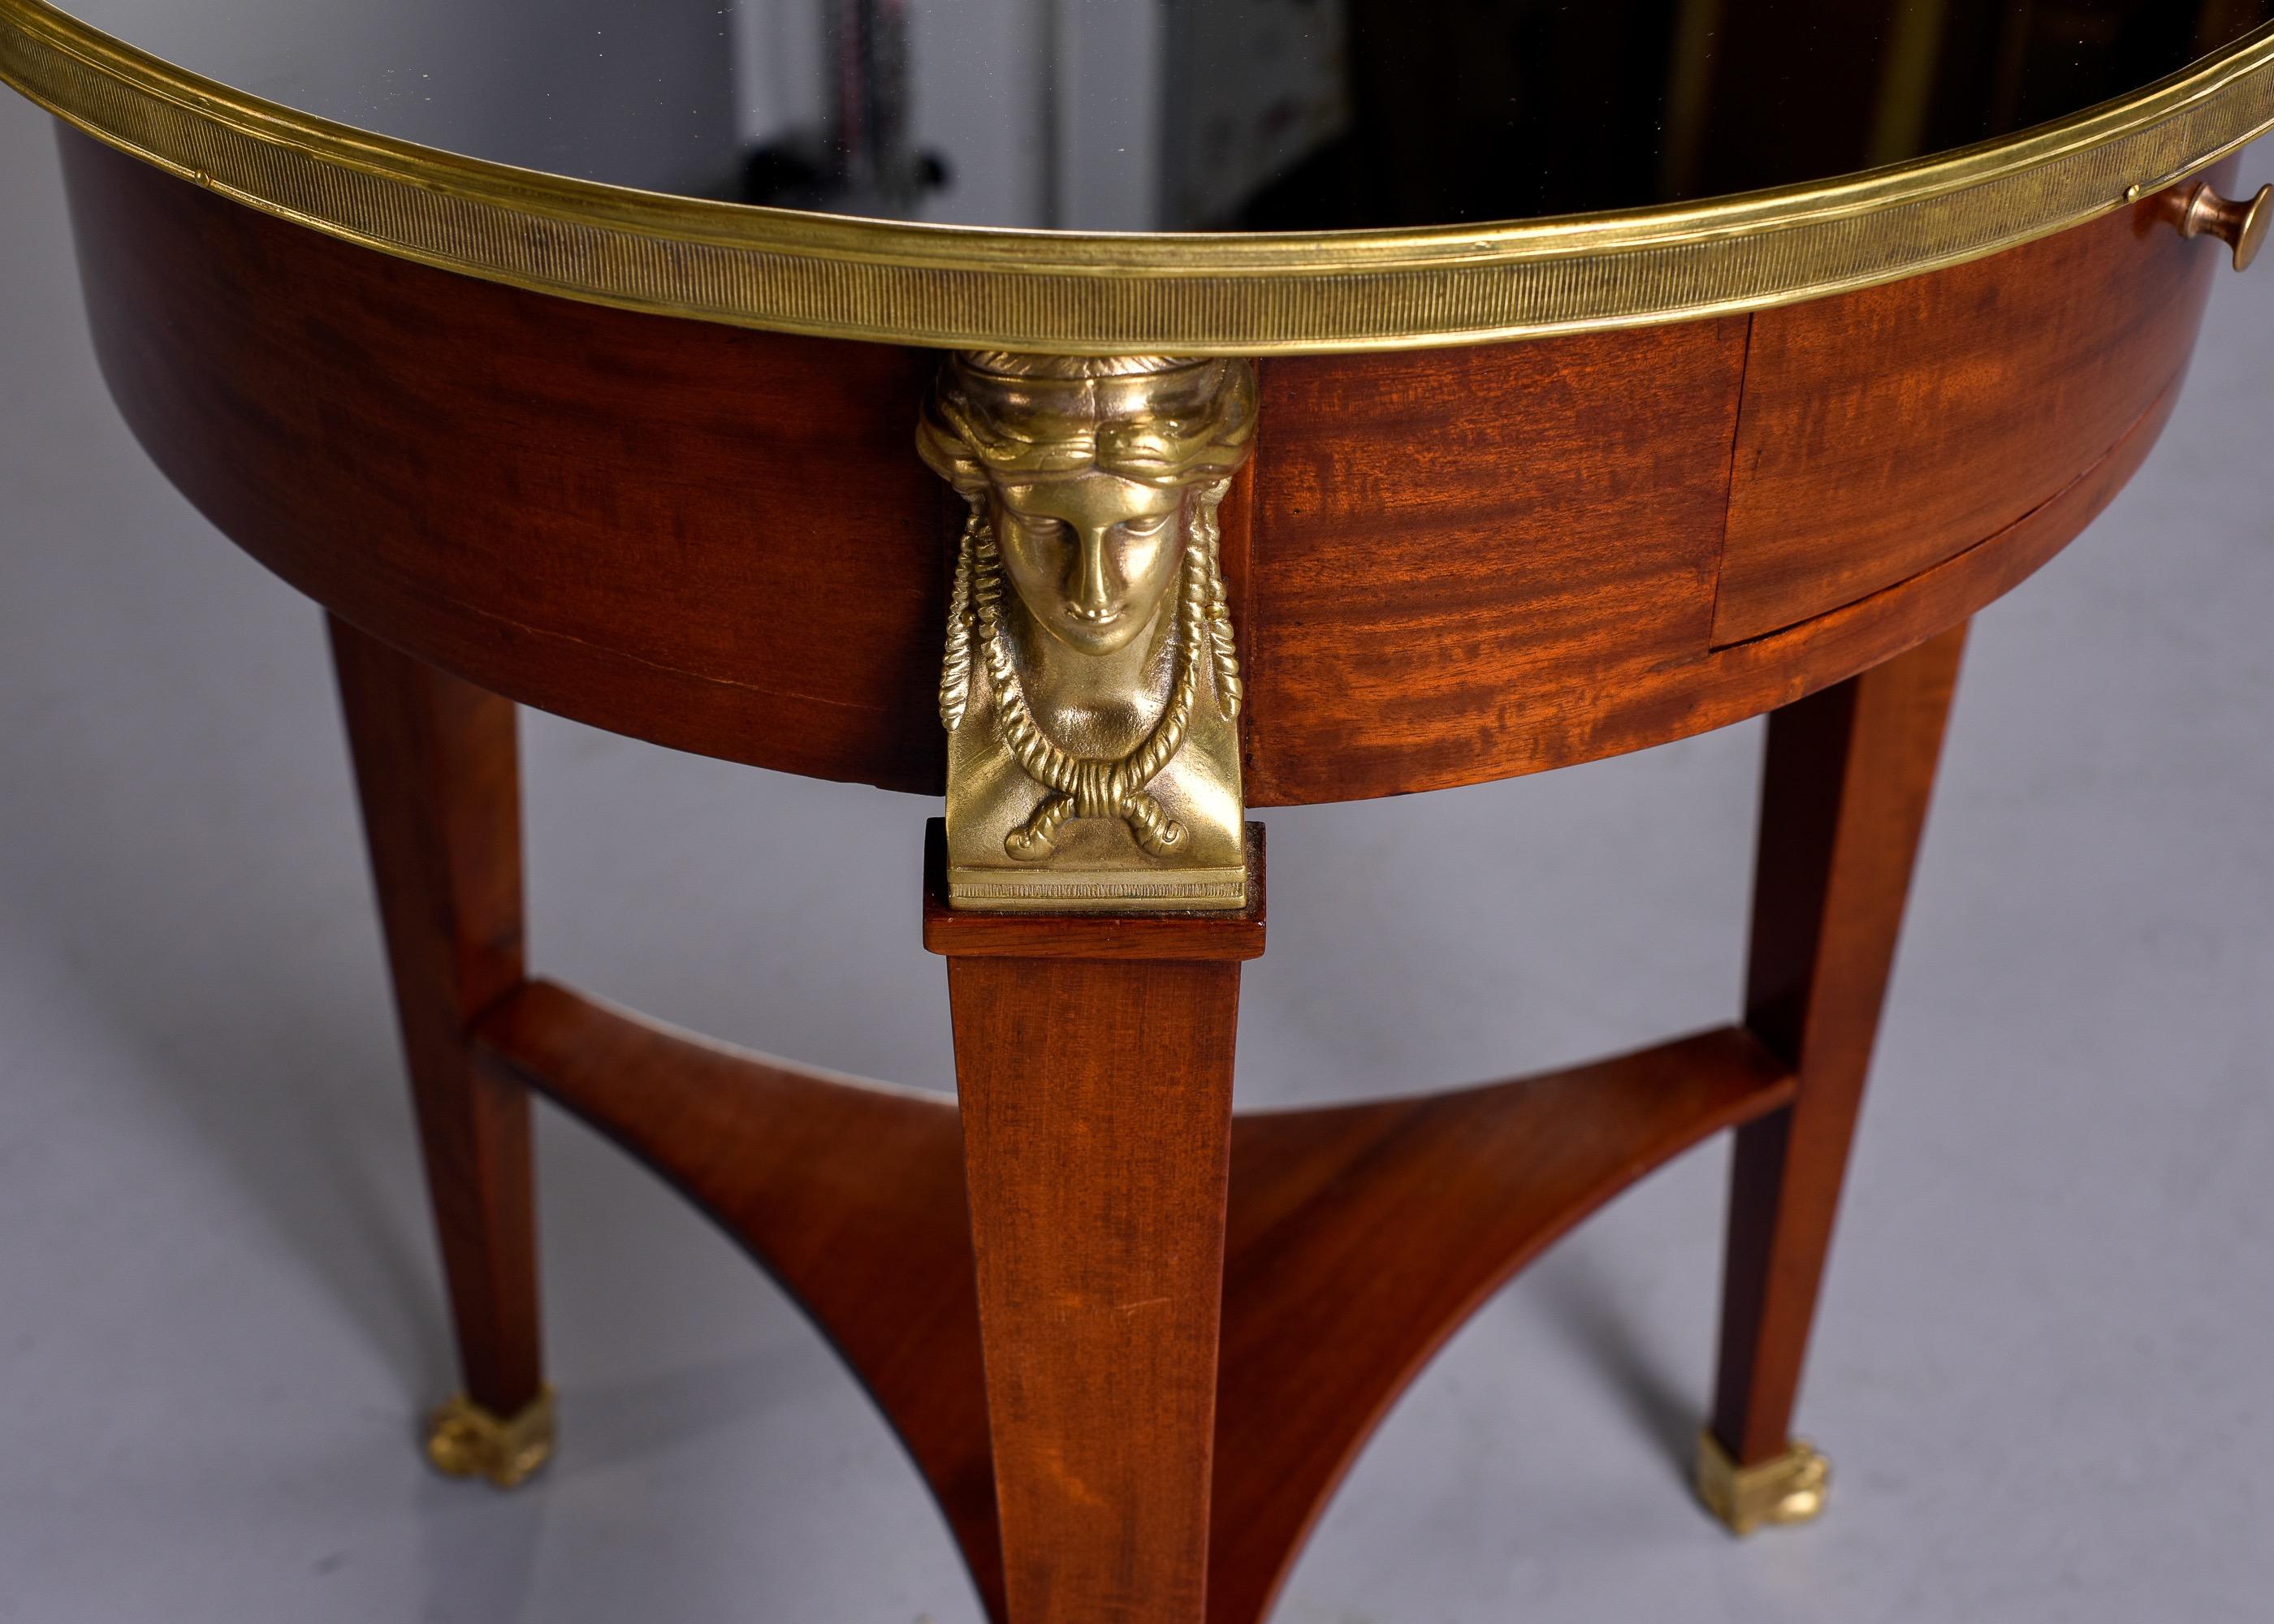 Circa 1920s three legged French Empire style walnut round side table with mirrored top, brass rim and feet, tapered legs topped with sculptural busts in brass and a small pull out drawer. Unknown maker. Very good antique condition.